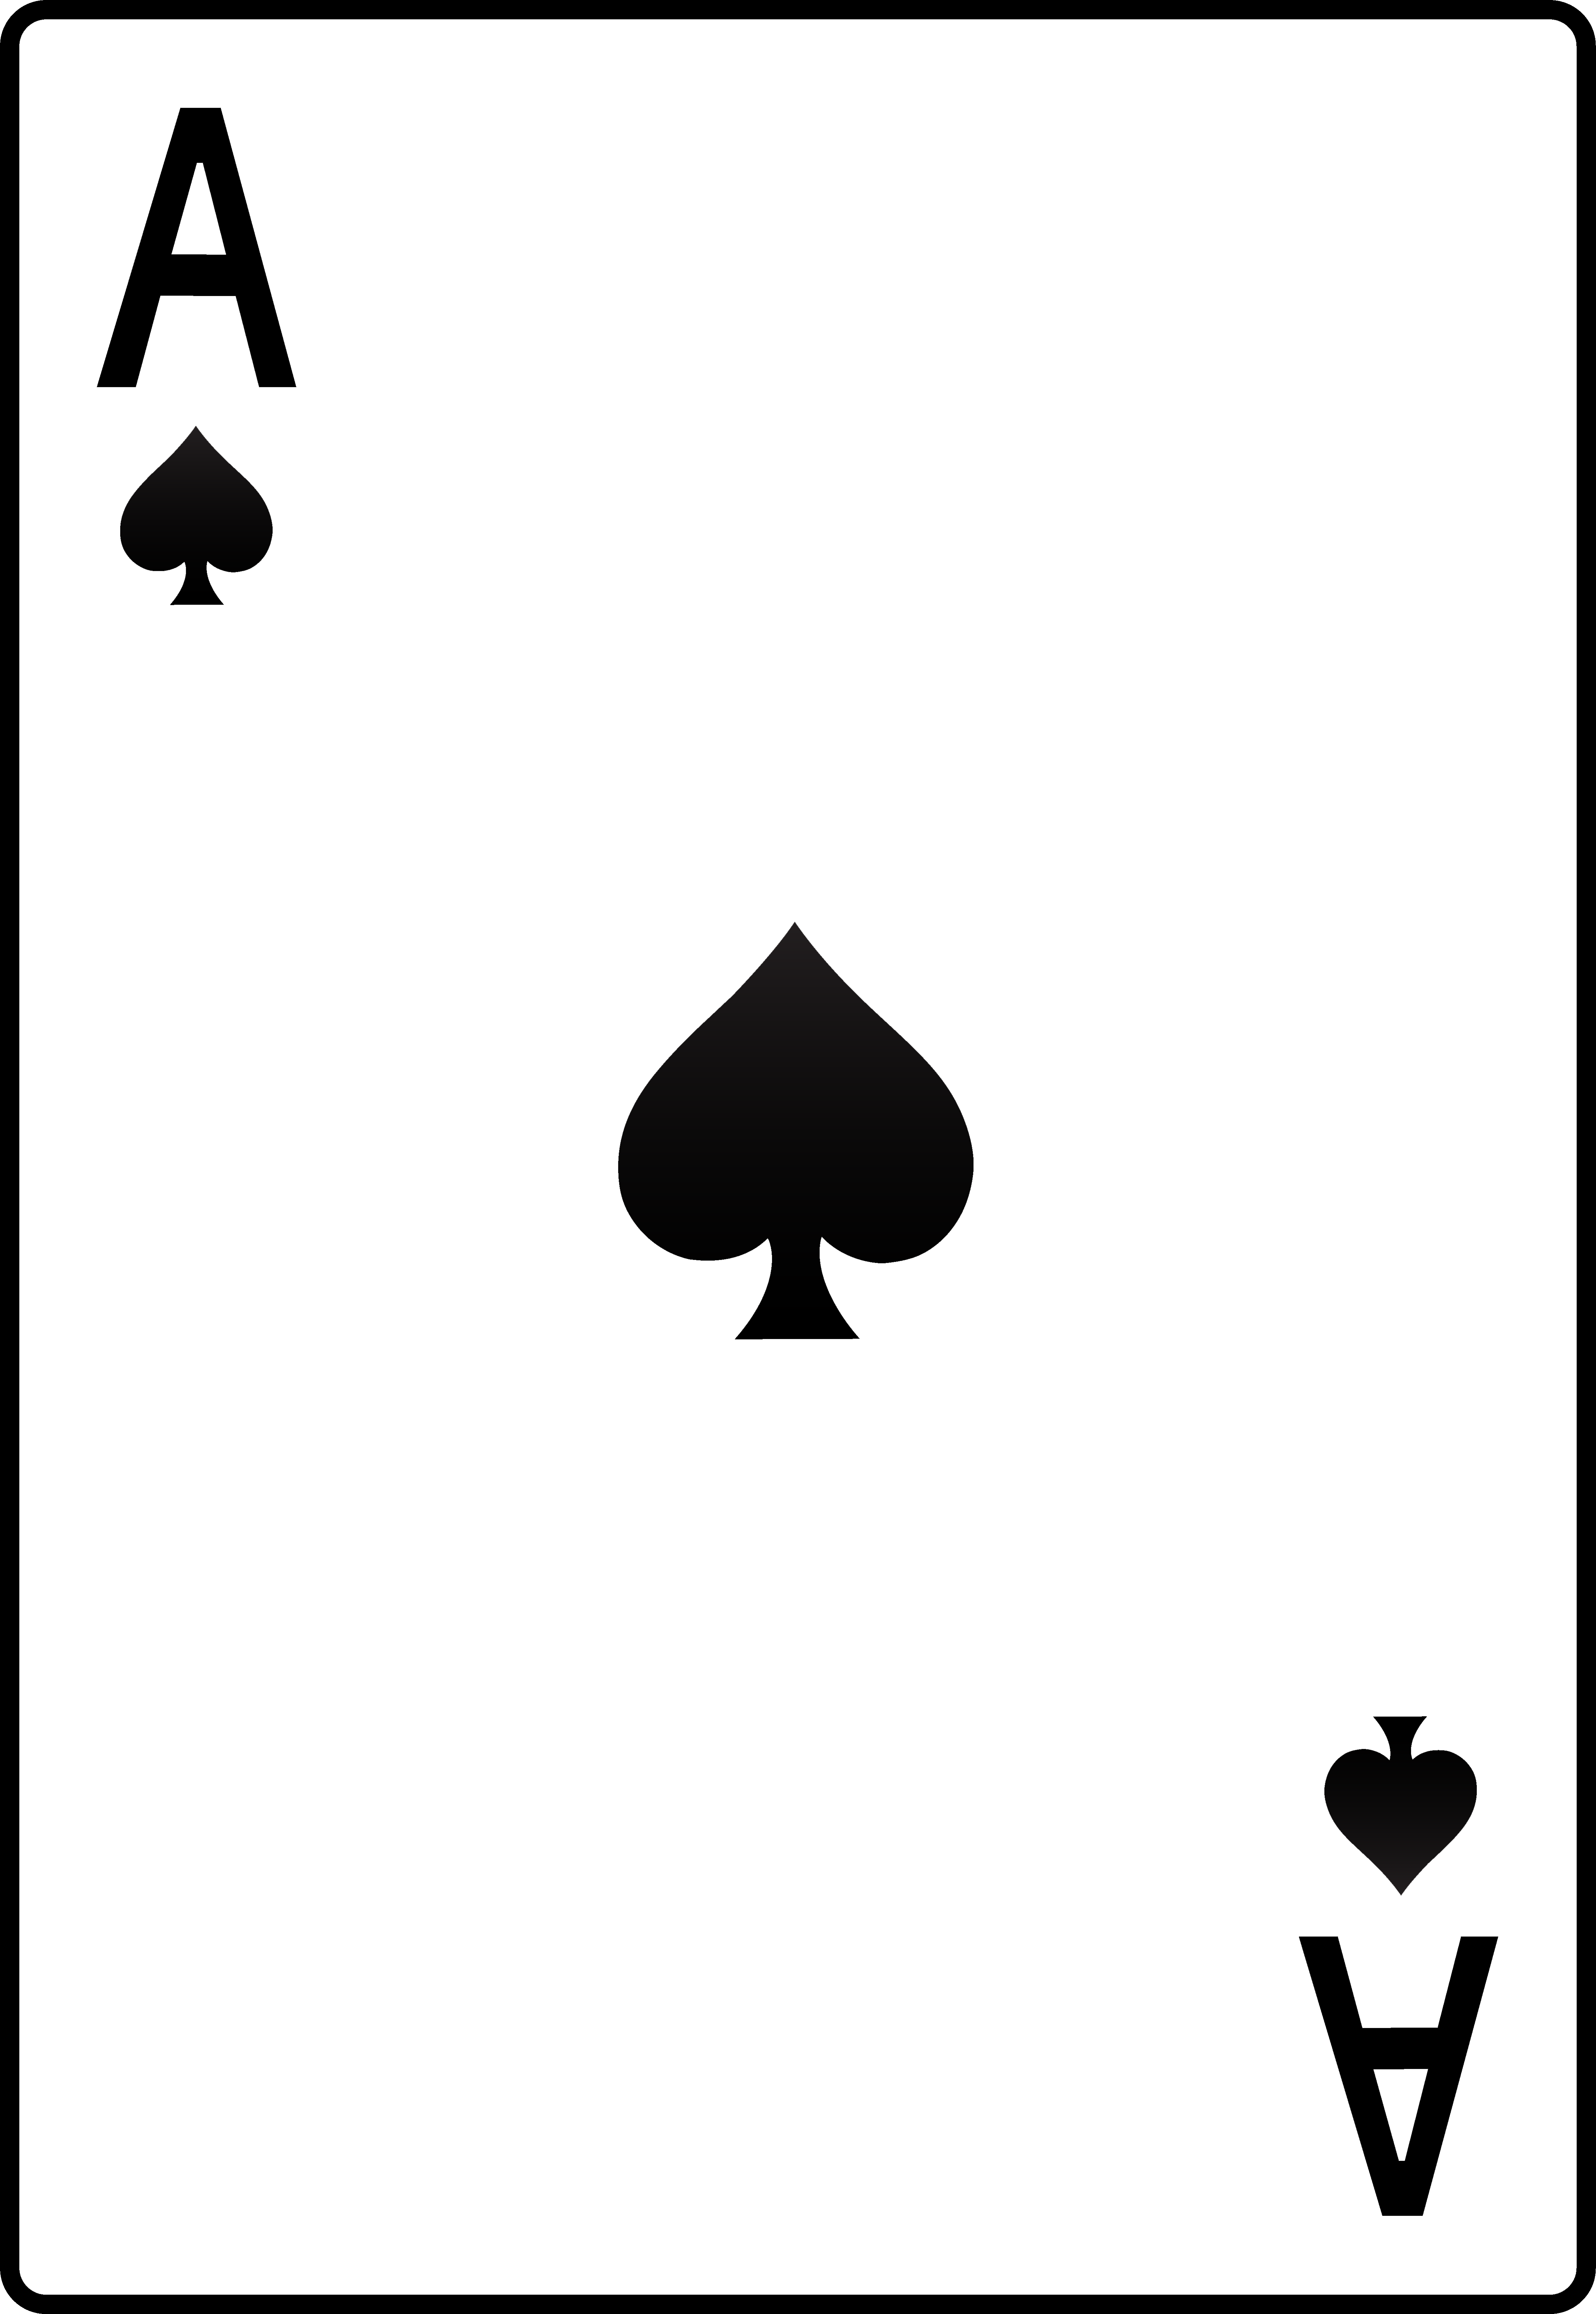 Ace Card File PNG Image